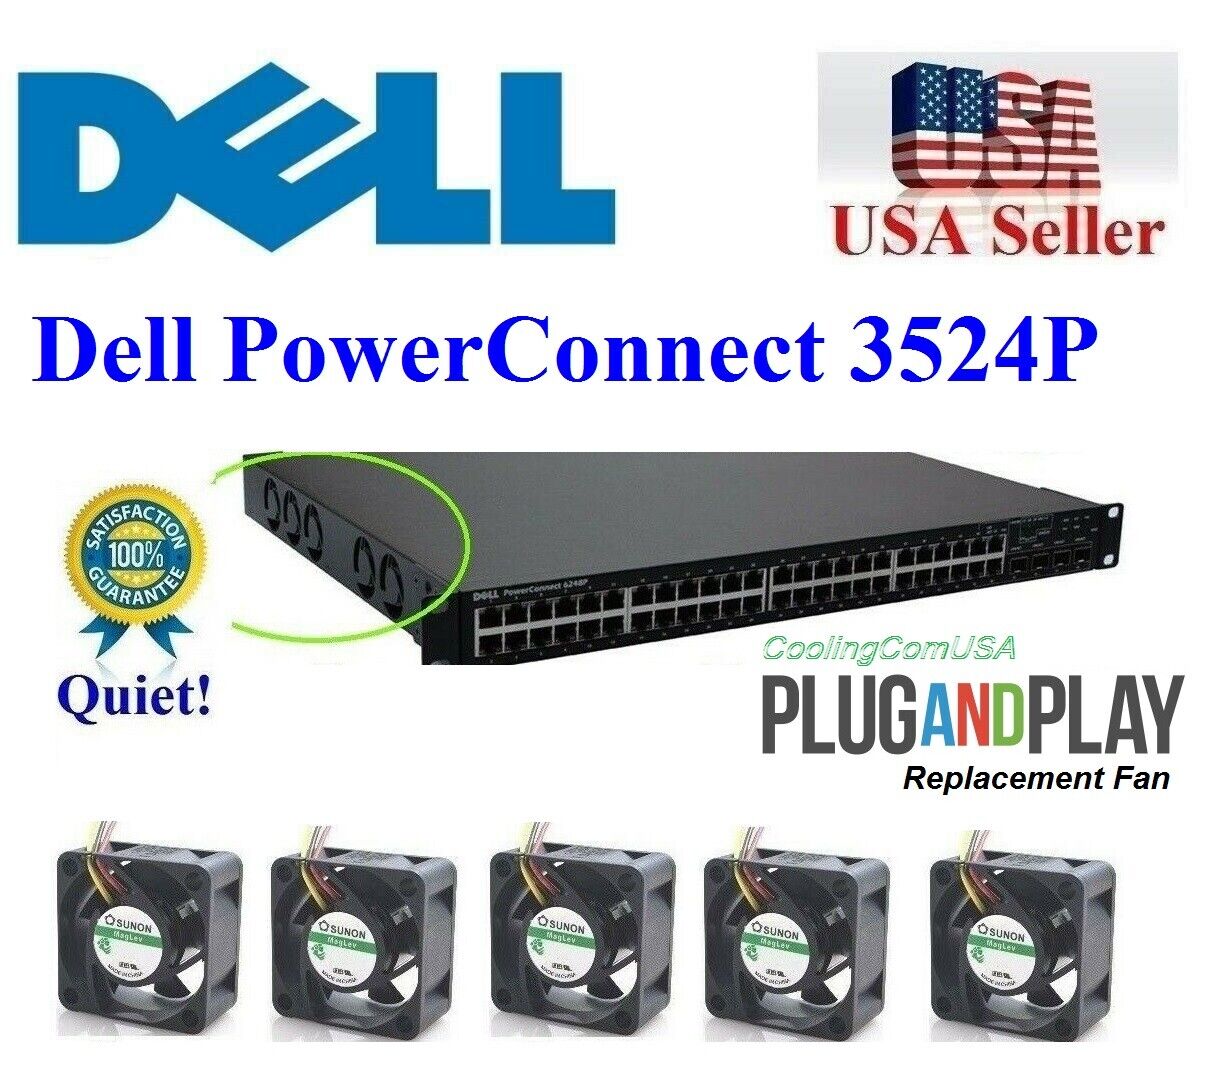 Pack 5x Replacement fans for Dell PowerConnect 3524P Best Home Networking